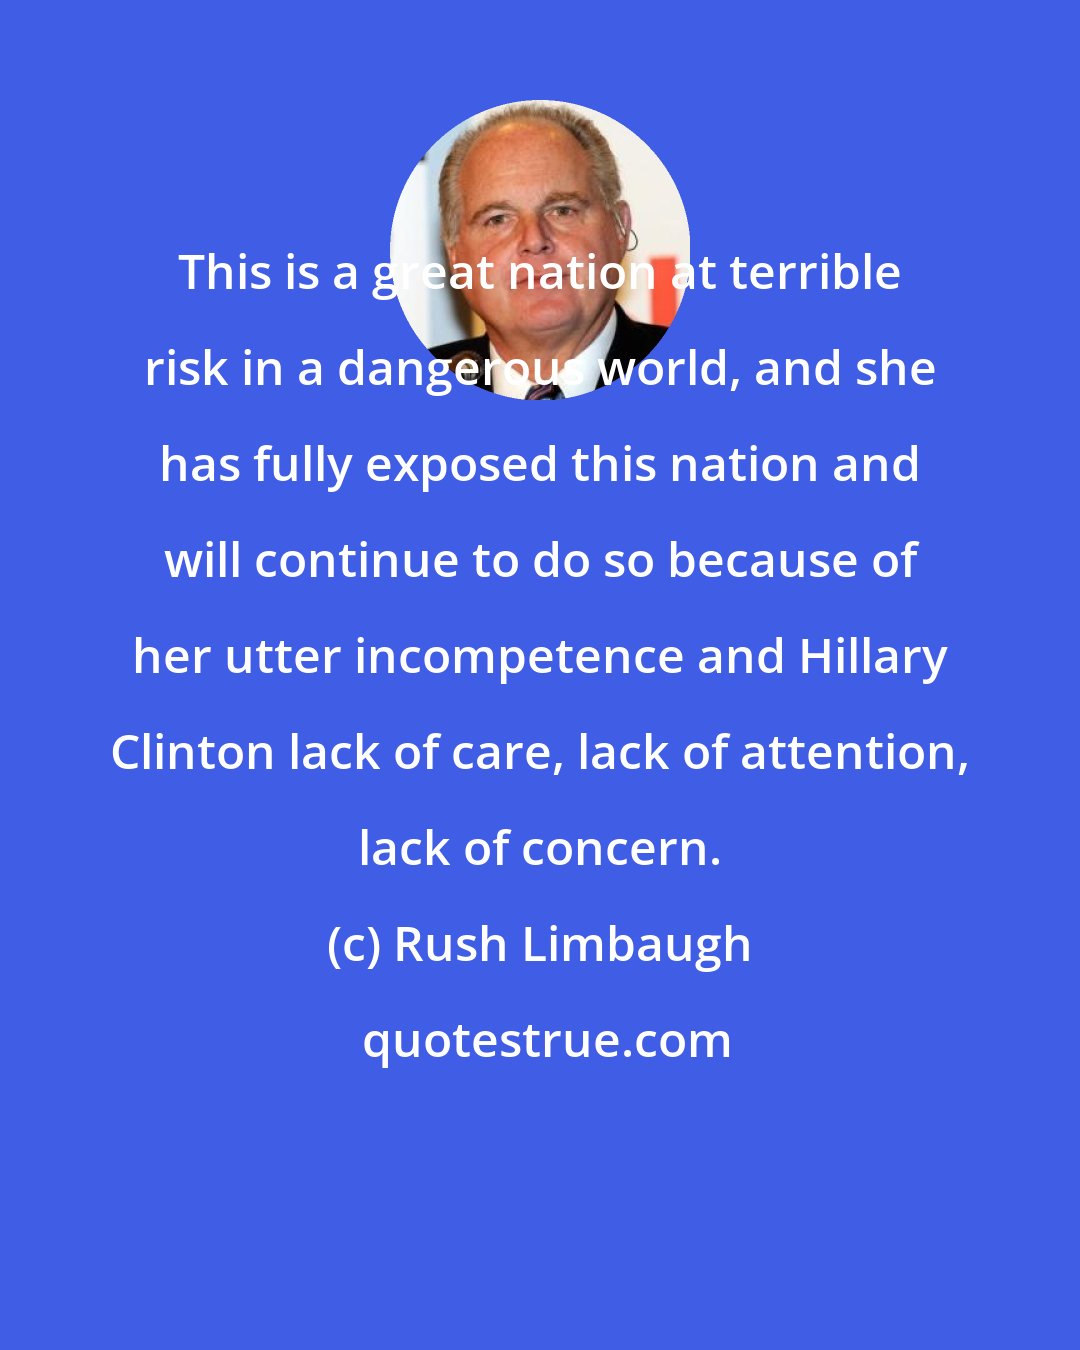 Rush Limbaugh: This is a great nation at terrible risk in a dangerous world, and she has fully exposed this nation and will continue to do so because of her utter incompetence and Hillary Clinton lack of care, lack of attention, lack of concern.